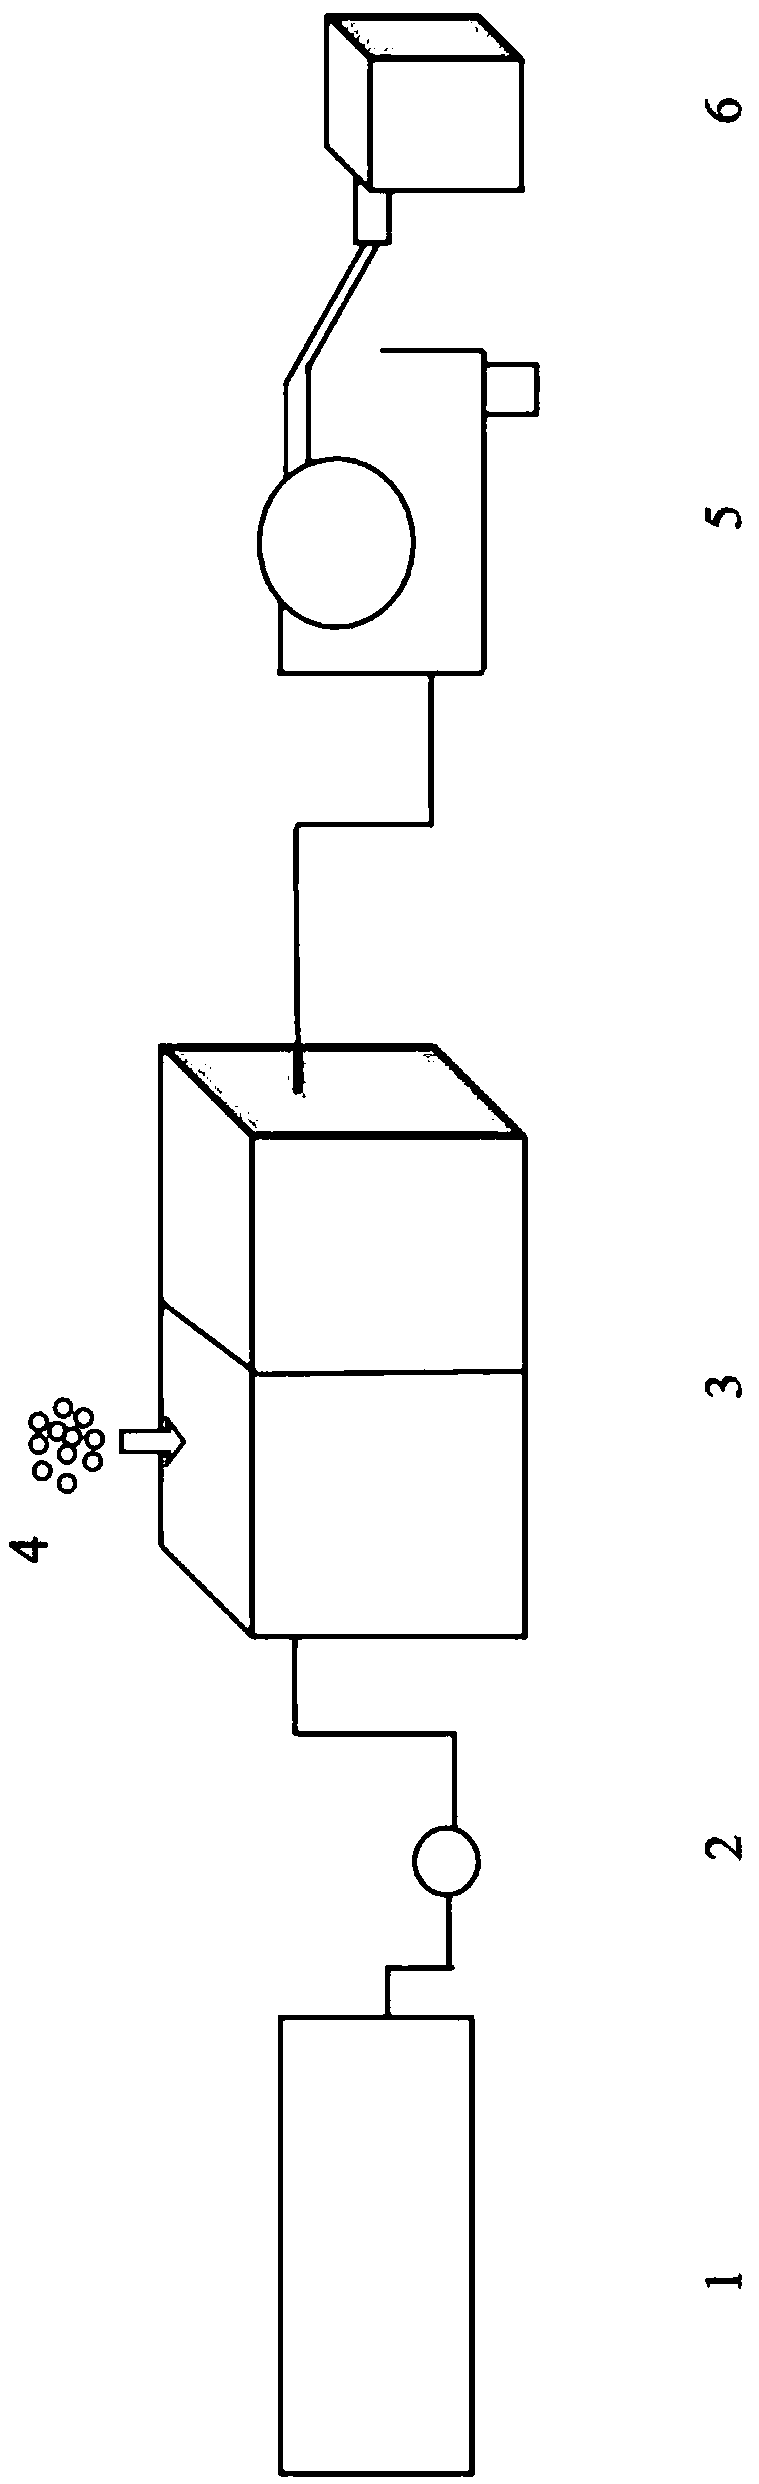 Method for harvesting oil-producing microalgae in urban sewage culture system on large scale by using magnetic particles